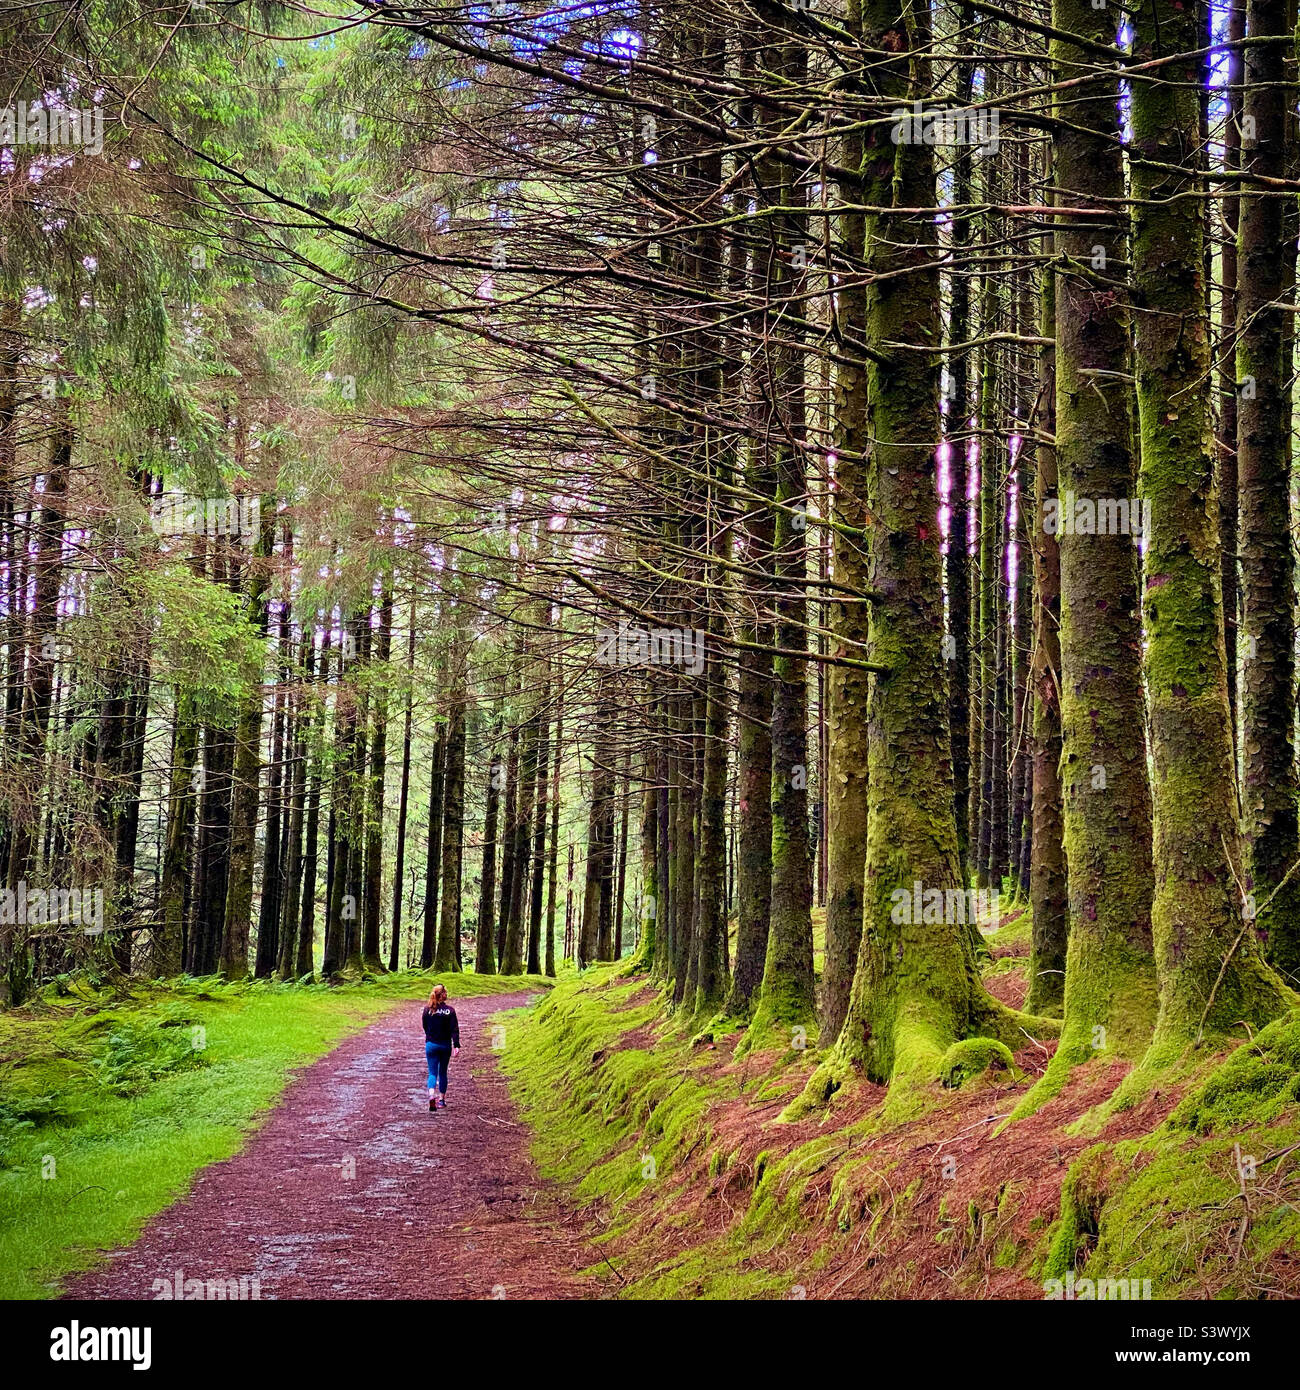 A woman walking on a track through a beautiful old forest in the popular Bwlch Nature Reserve near Aberystwyth in Wales where the trees are covered in moss Stock Photo